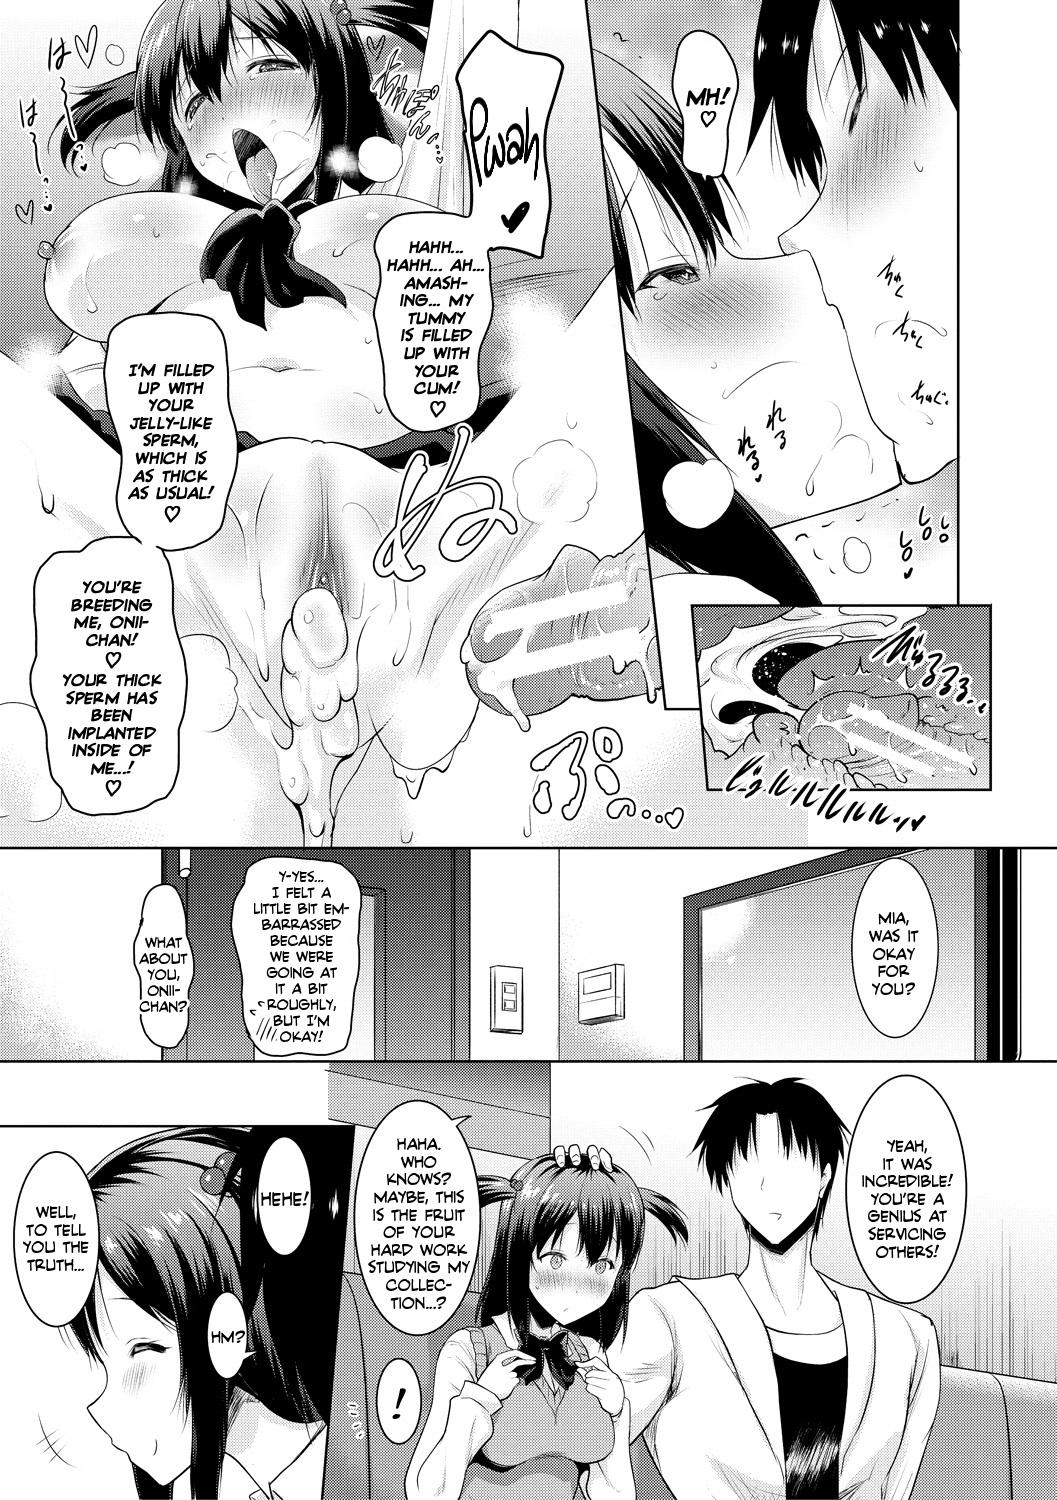 [Pony-R] I Can't Live Without My Little Sister's Tongue Chapter 01-02 + Secret Baby-making Sex with a Big-titted Mother and Daughter! (Kyonyuu Oyako no Shita to Shikyuu ni Renzoku Shasei) [English] [Team Rabu2] [Digital] 38